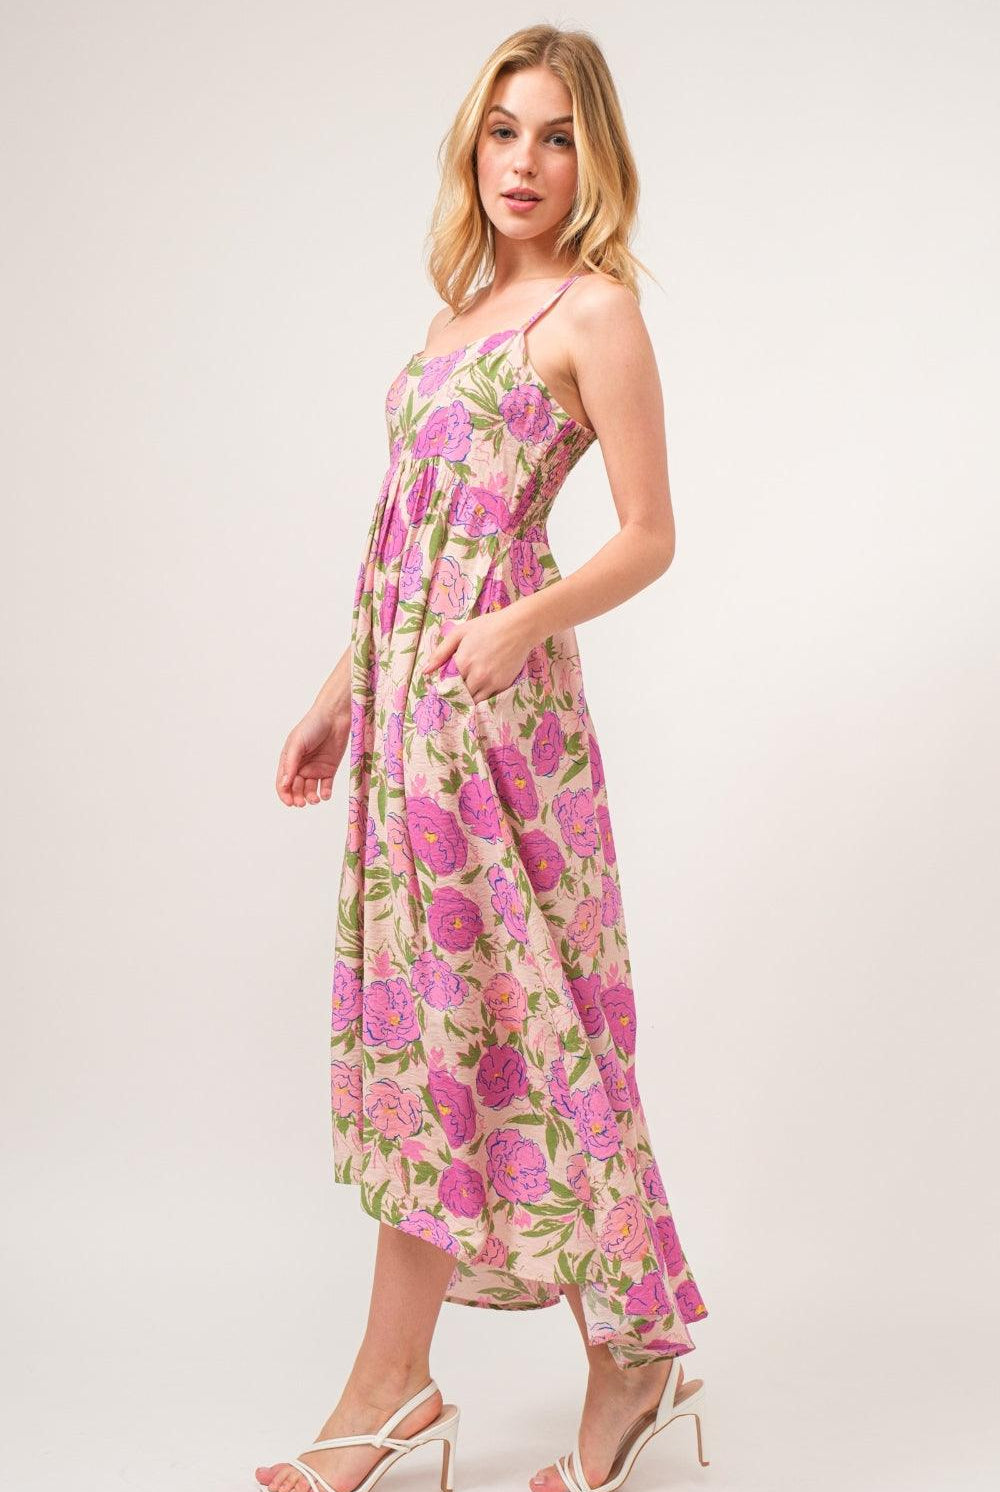 Women's Dresses And The Why Floral High-Low Hem Cami Dress